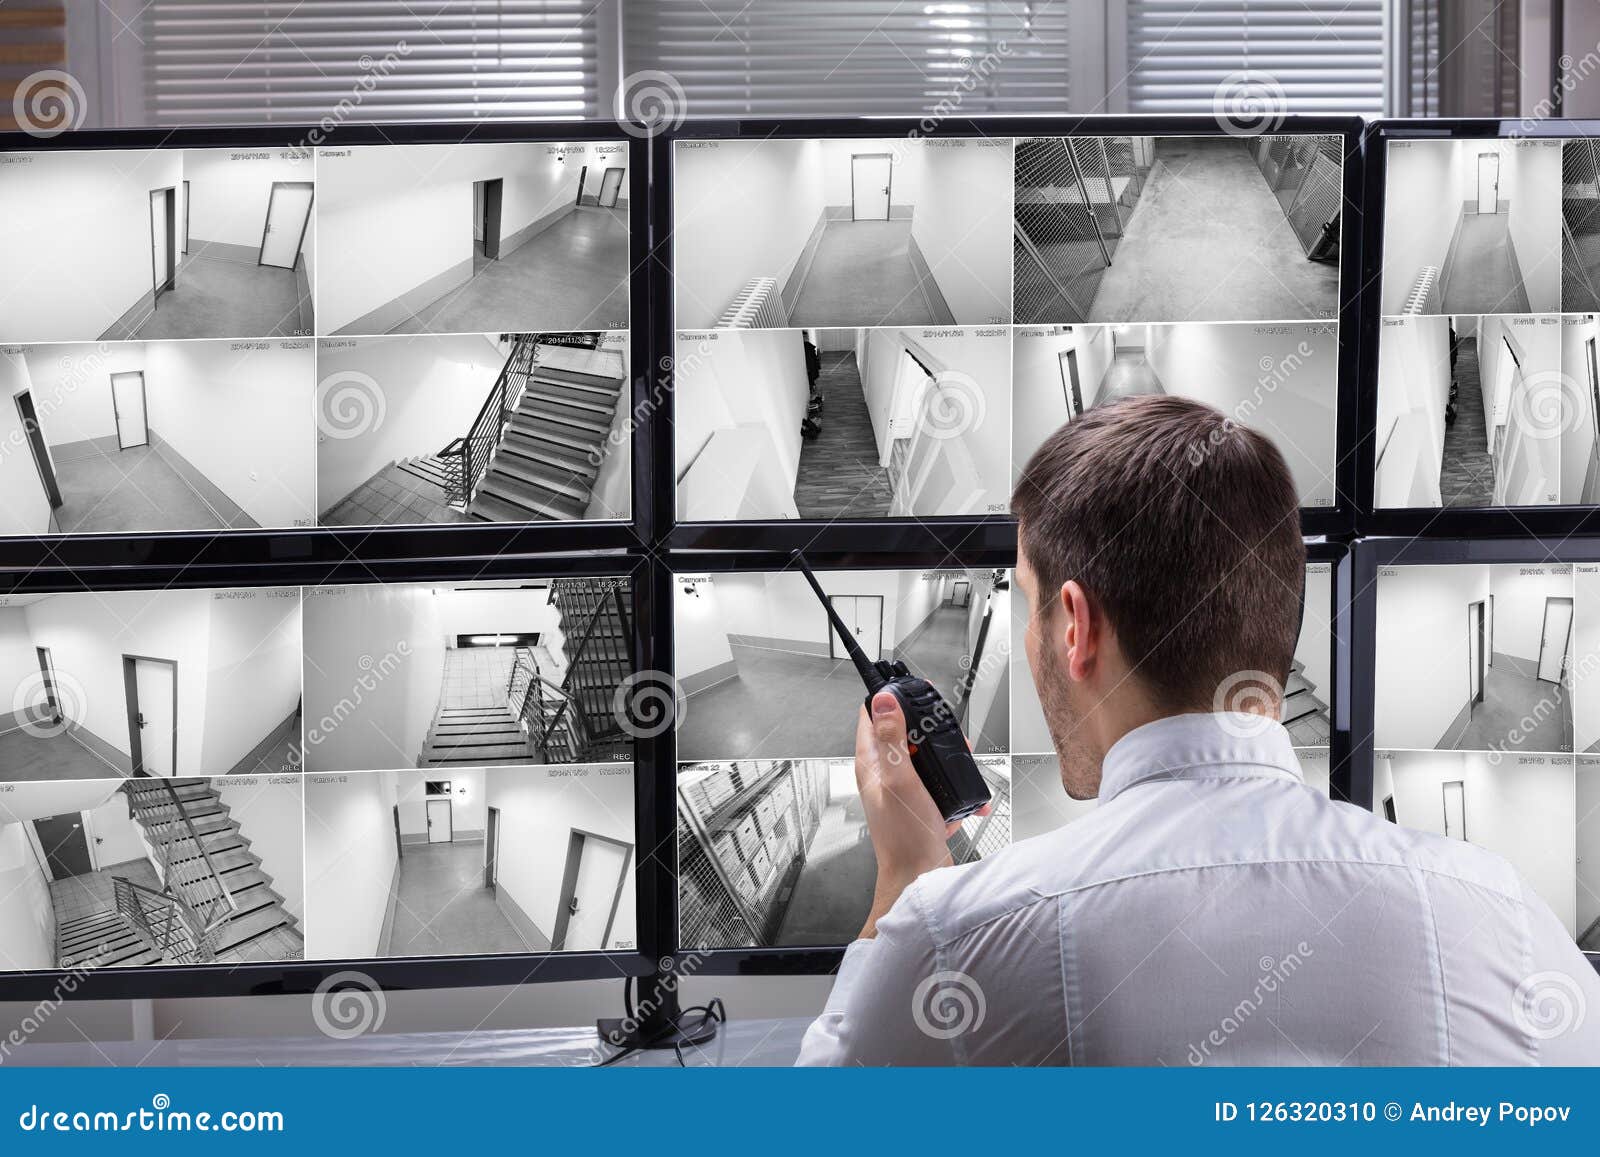 security guard monitoring cctv footage